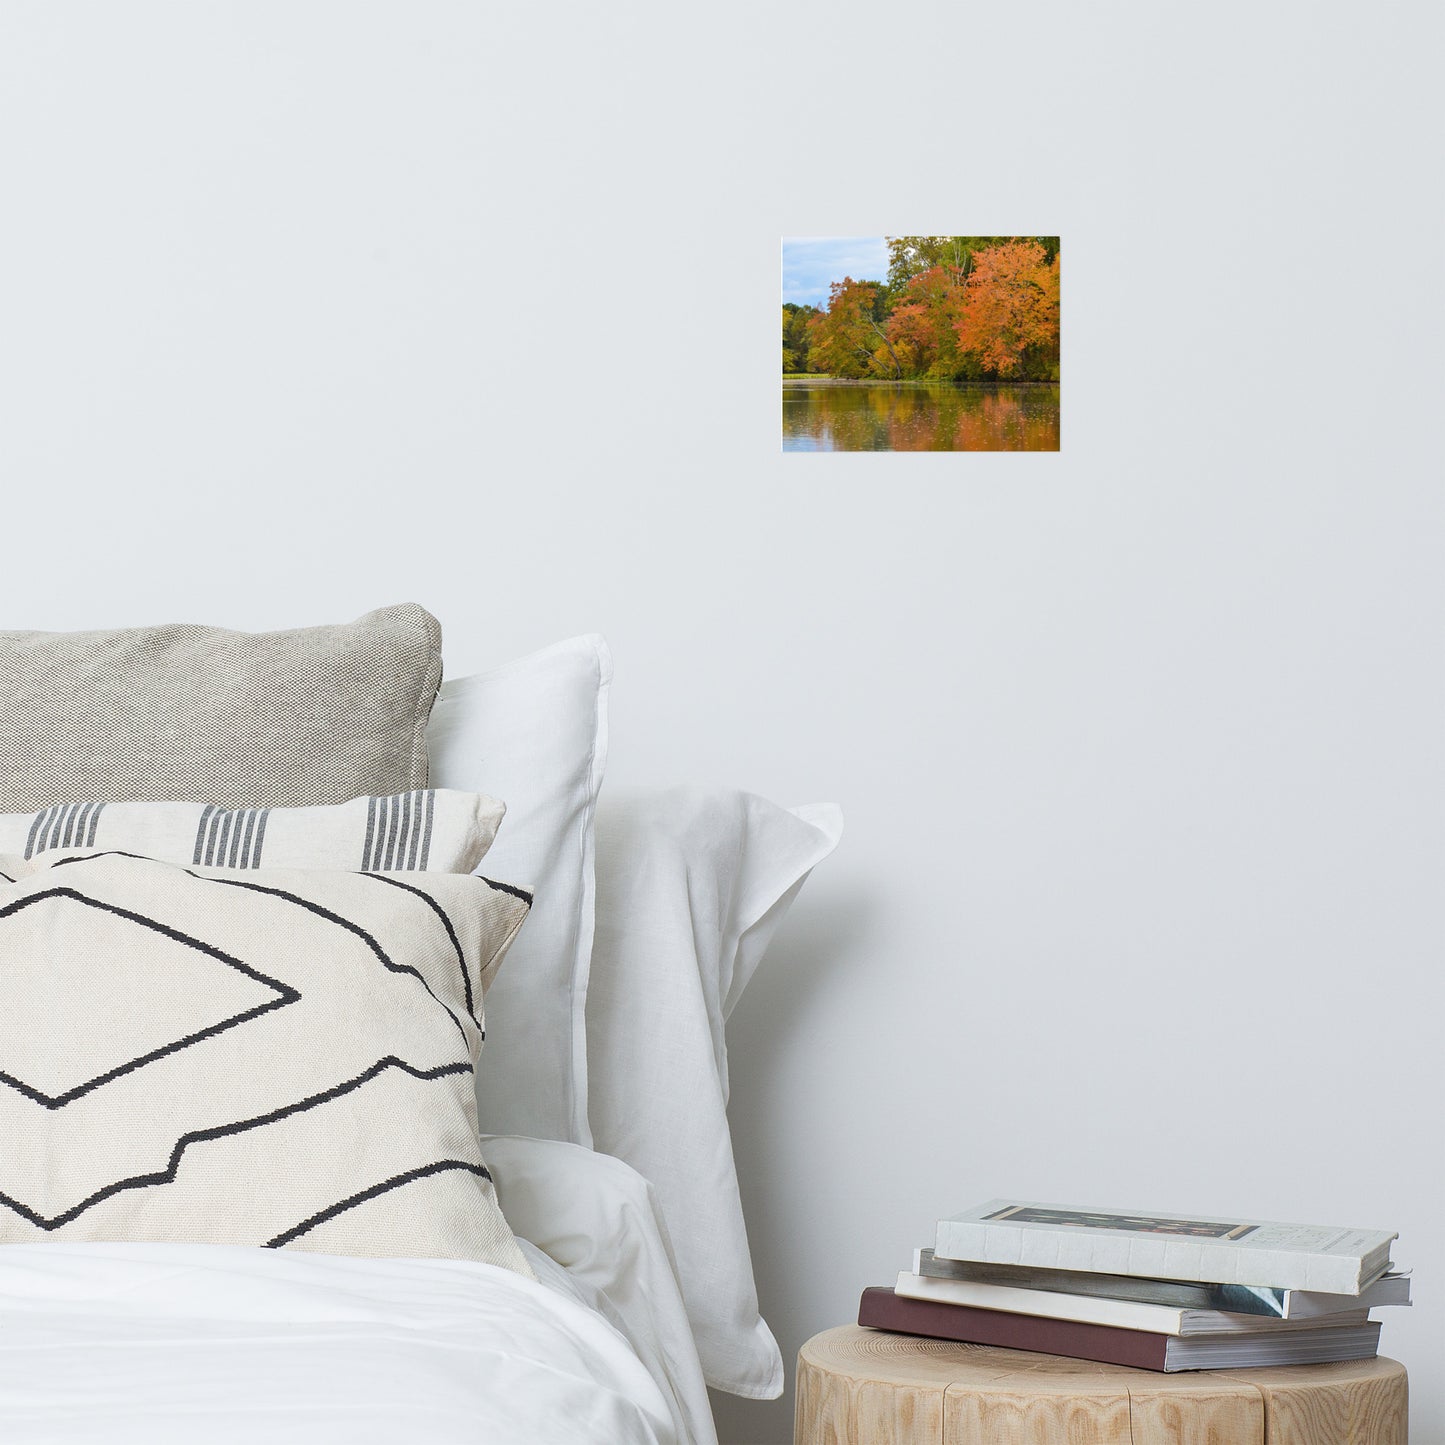 Art Above Master Bed: Colorful Trees in Fall Color Edge of Pond - Rural / Country Style Landscape / Nature Loose / Unframed / Frameless / Frameable Photograph Wall Art Print - Artwork